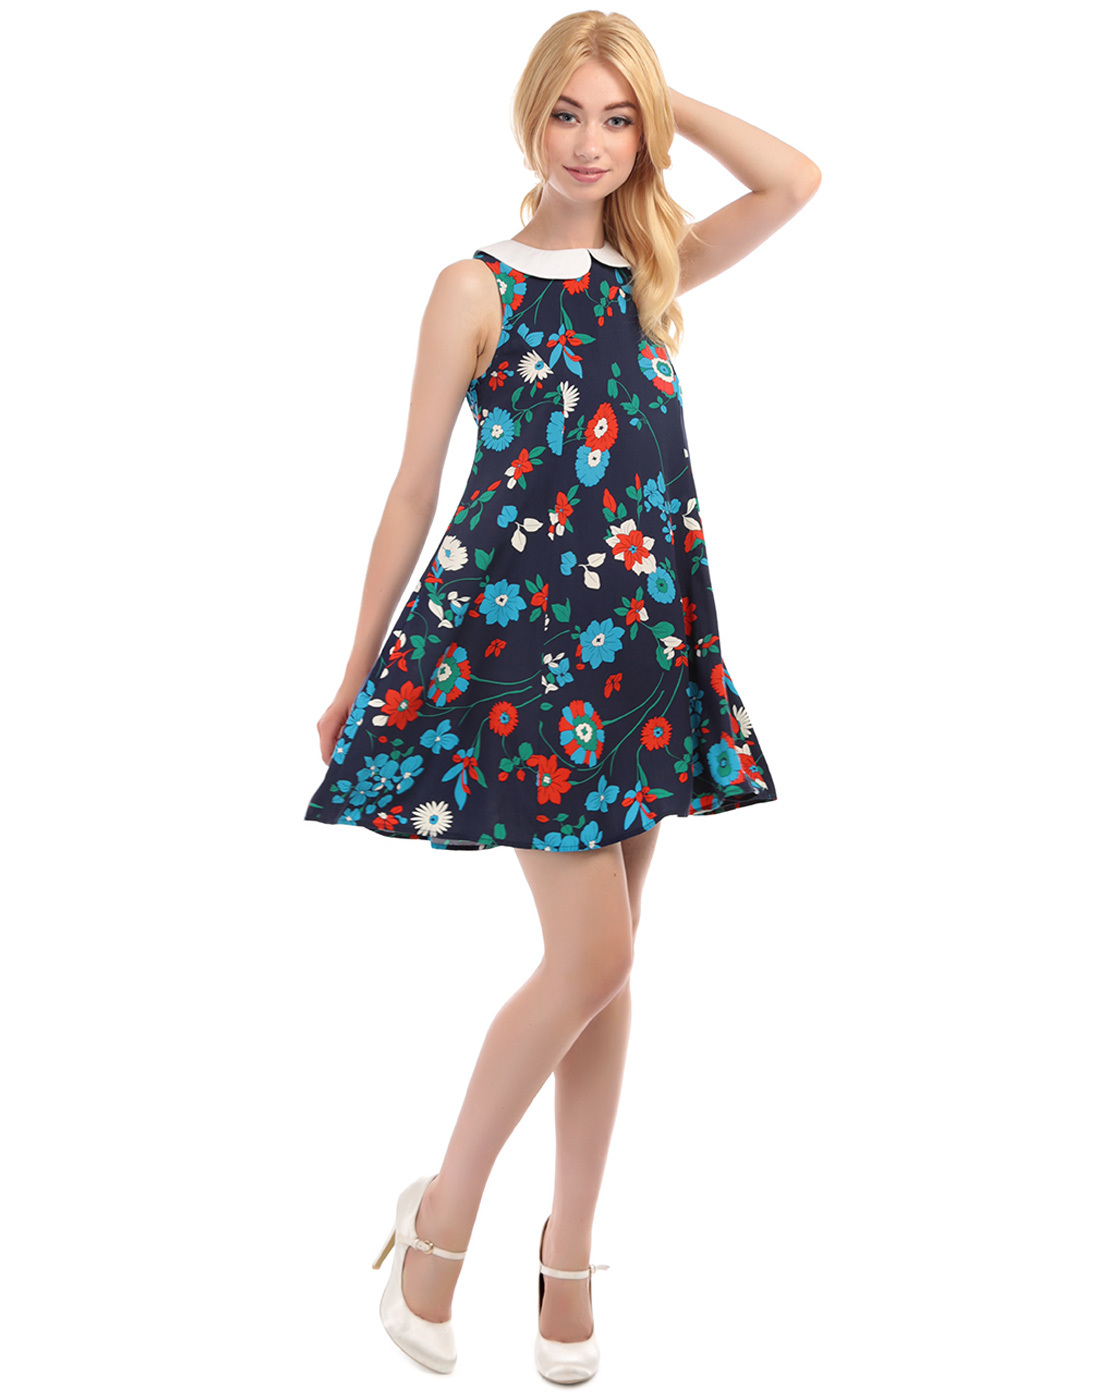 BRIGHT & BEAUTIFUL Nia 60s Floral Baby Doll Dress in Navy